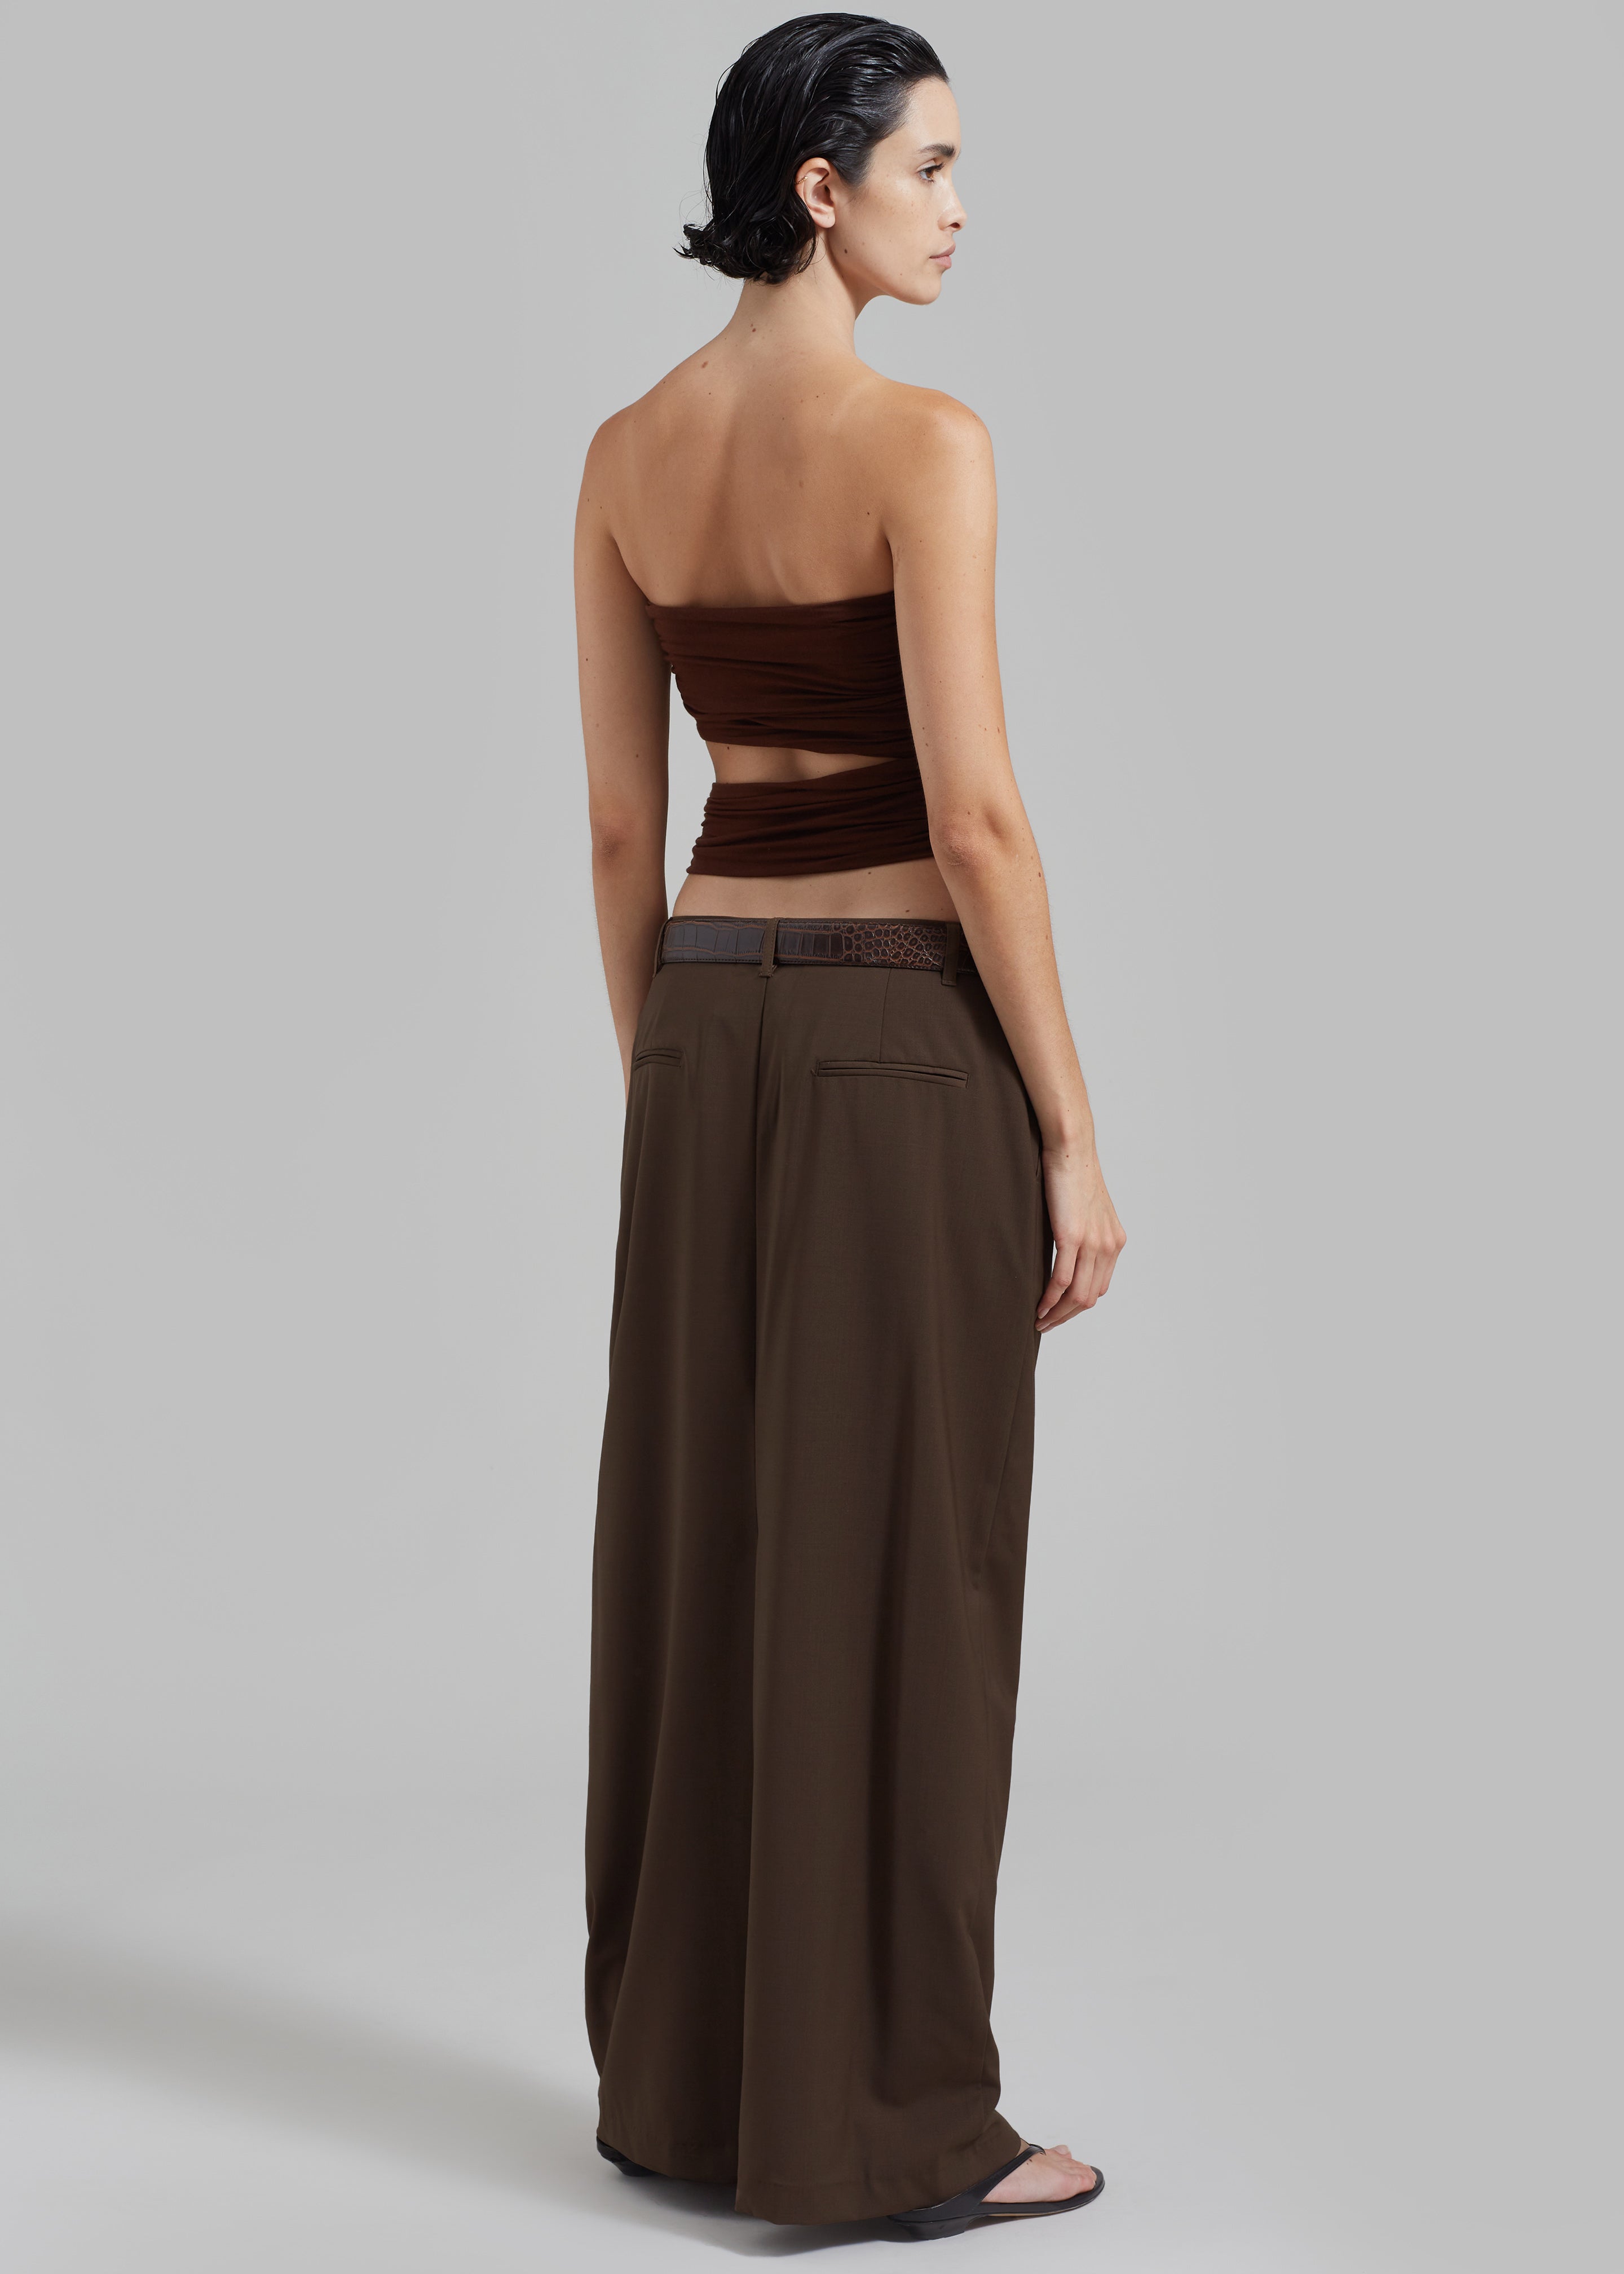 Matteau Relaxed Tailored Skirt - Coffee - 7